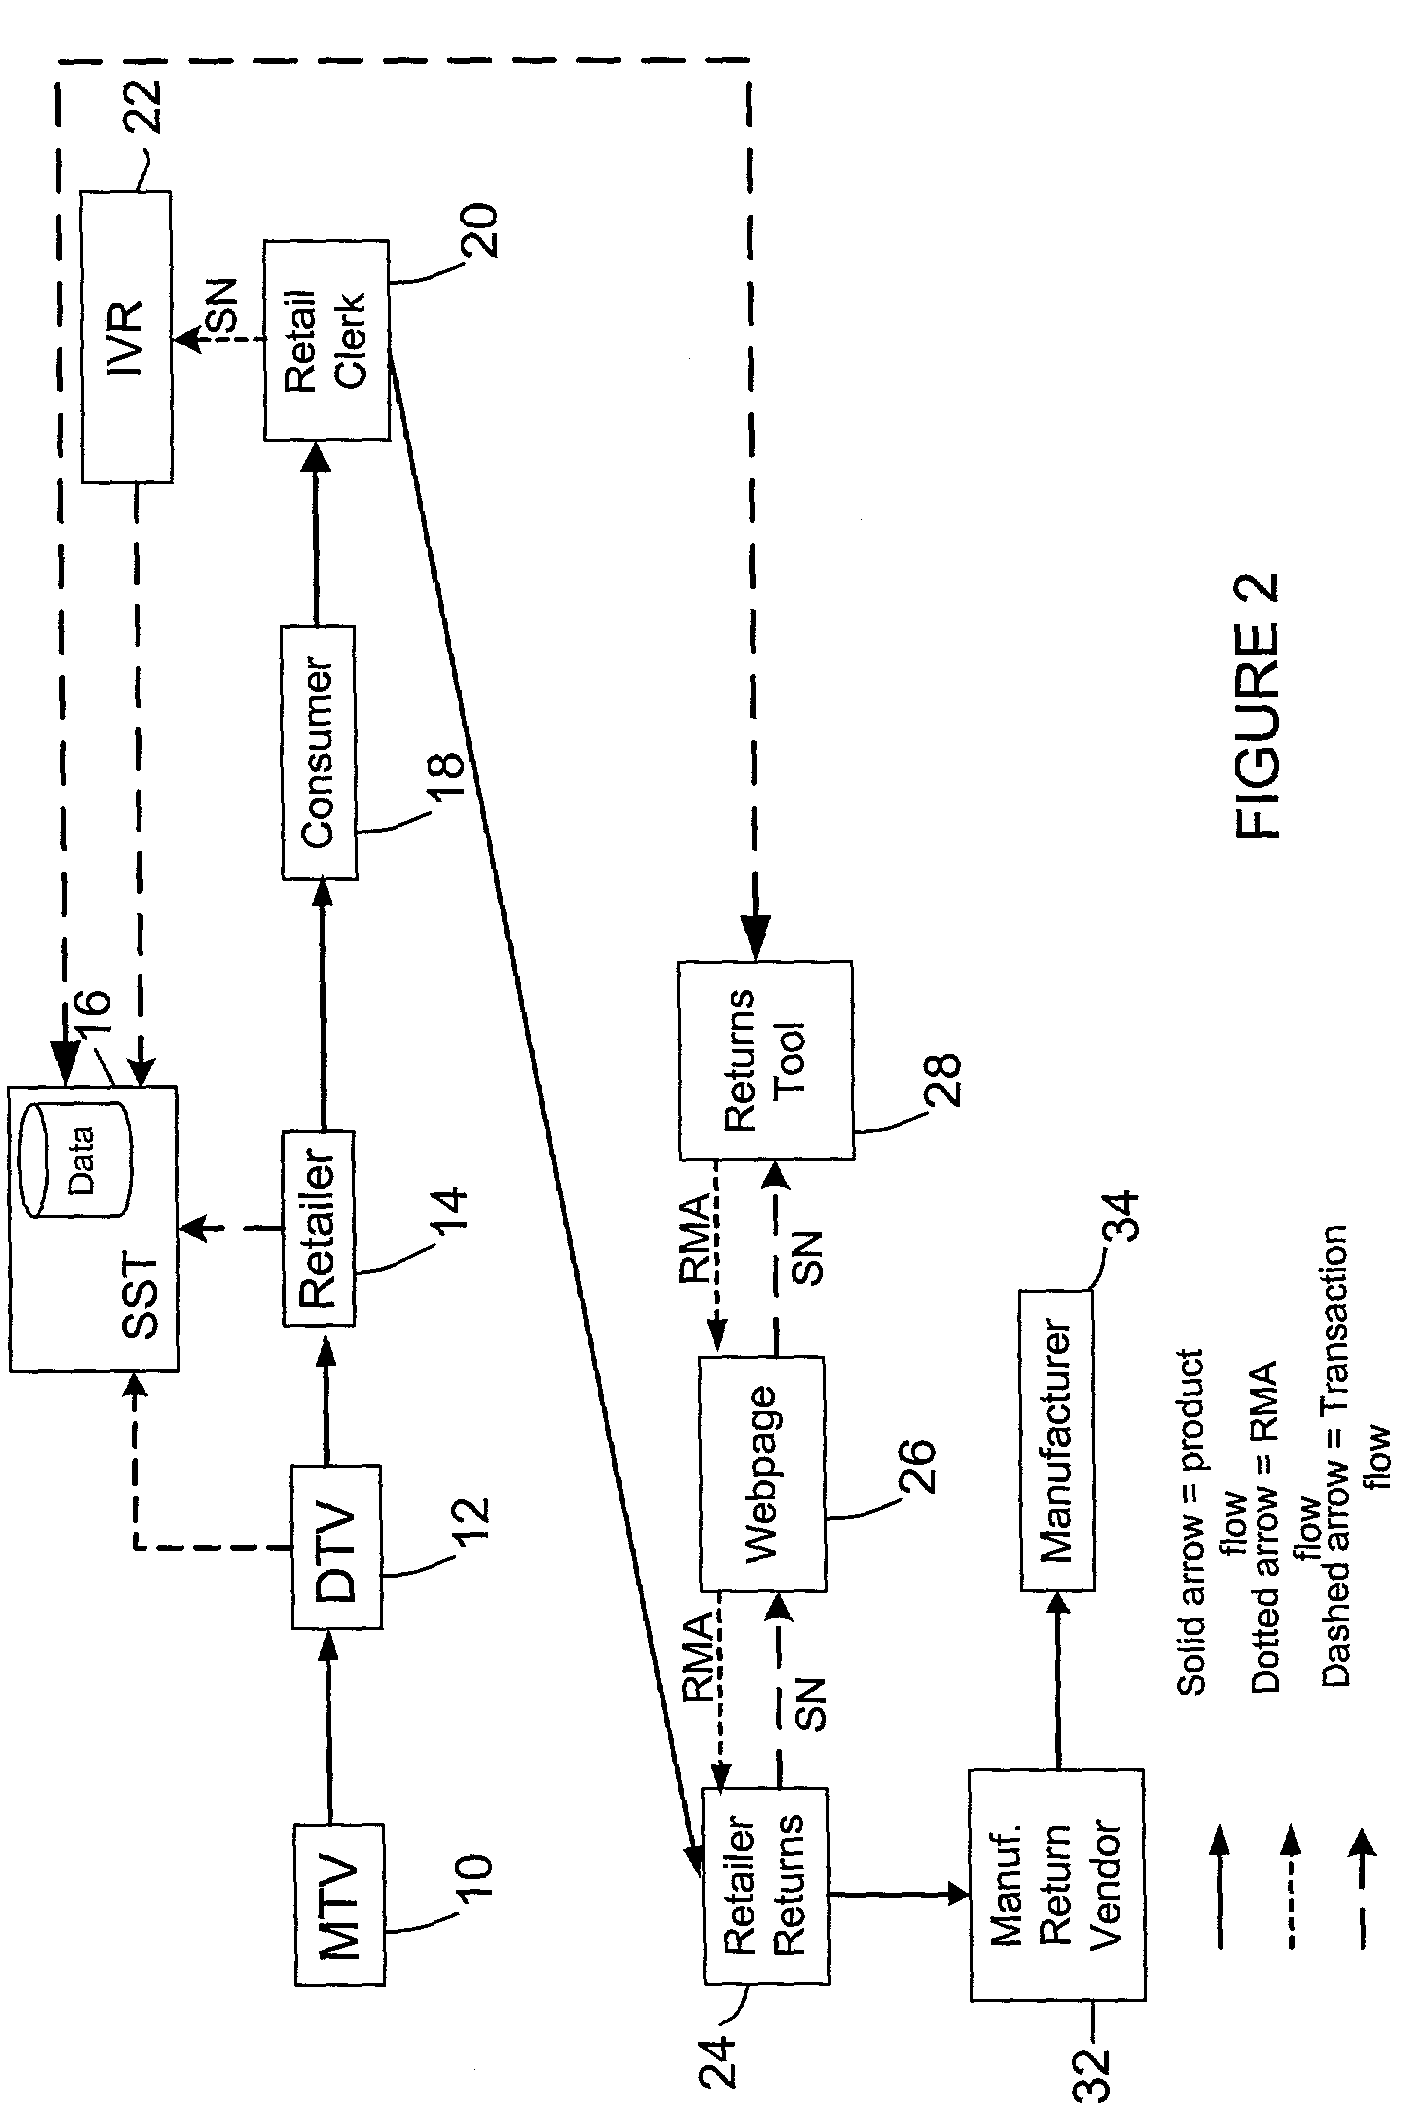 Touch point and attribute tracking system and process